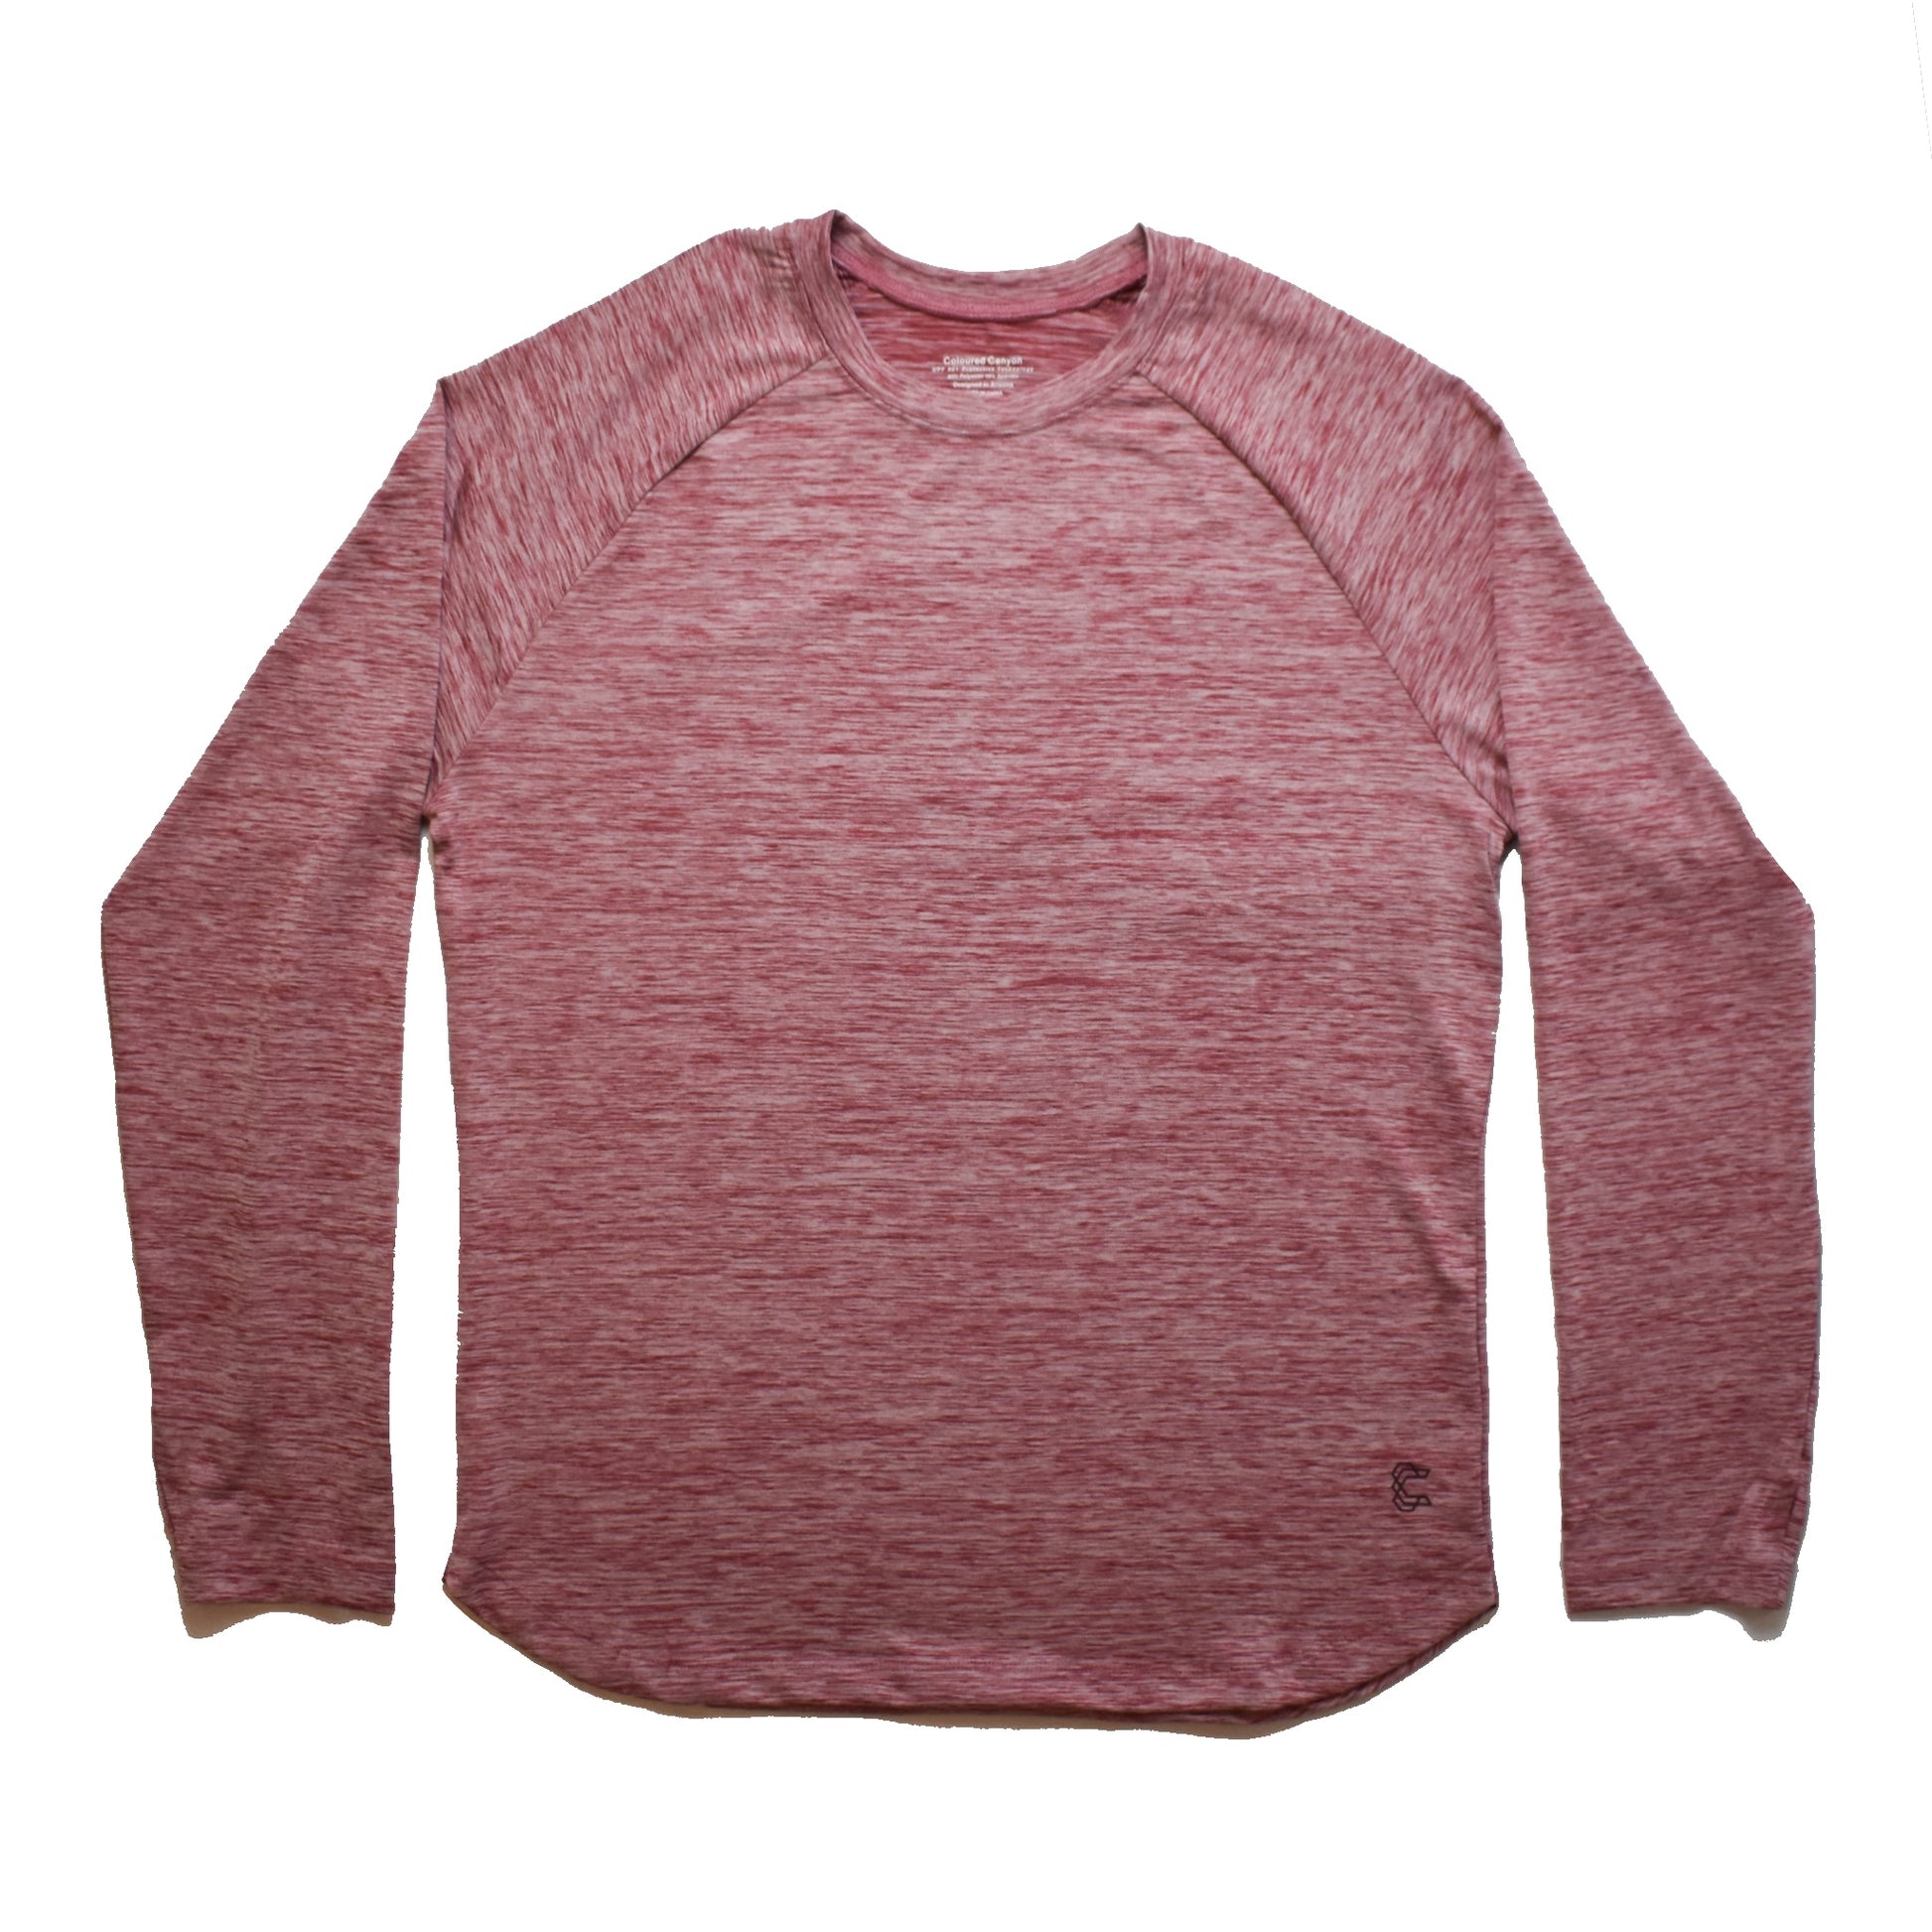 Long sleeve heathered red UPF 50+ mens top